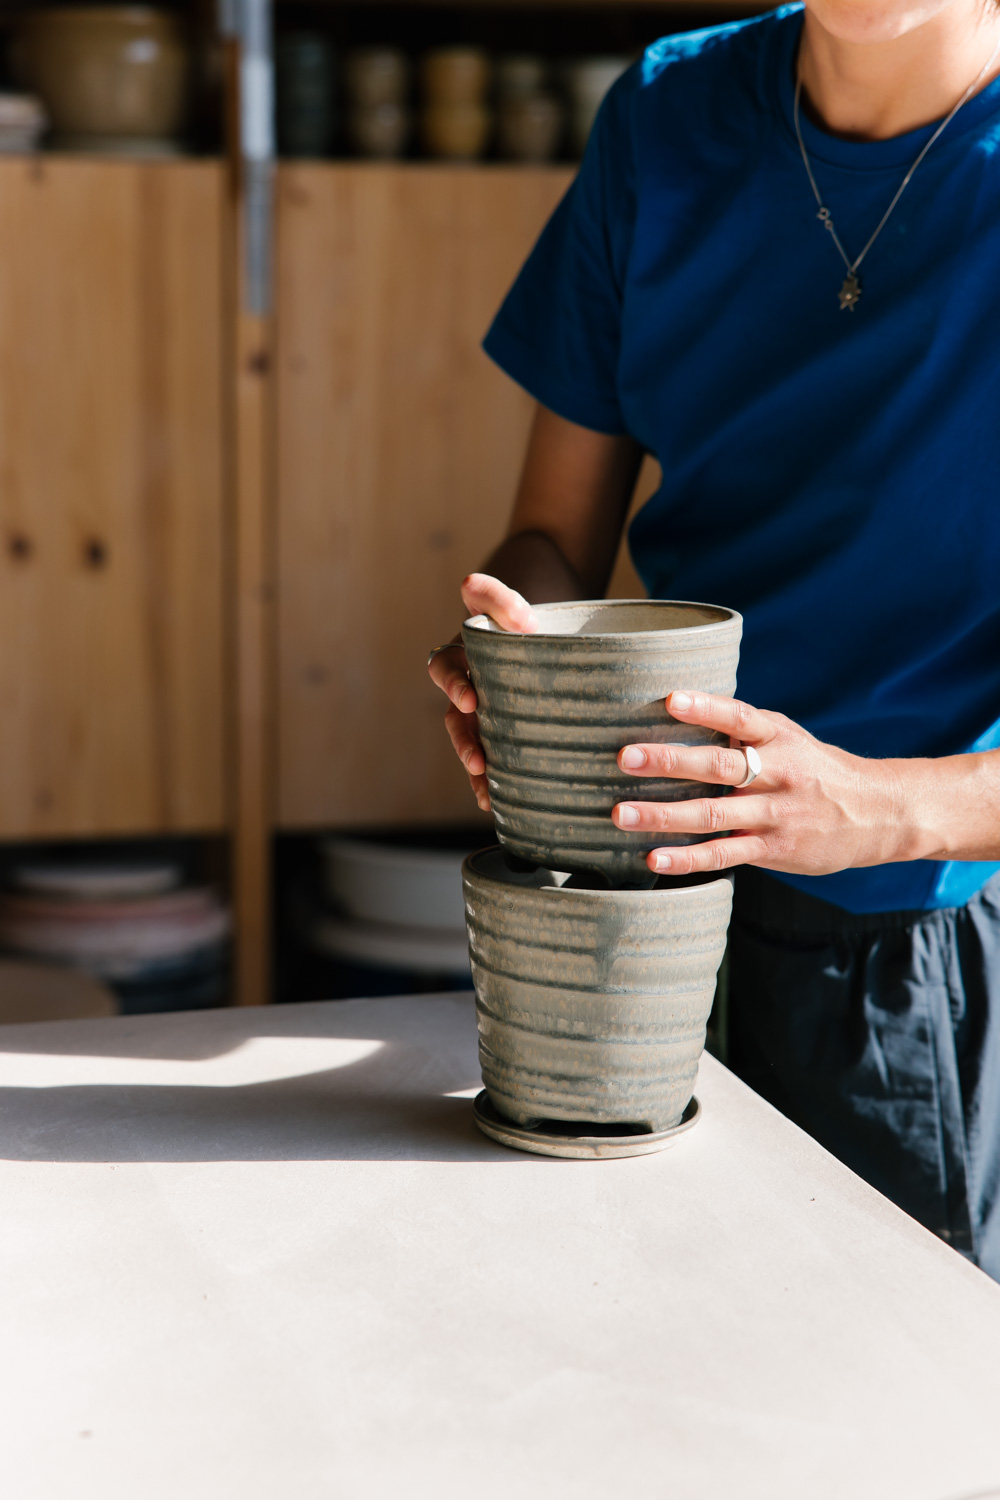 Ceramic planters stacked together in the hands of Melody Brunton as she arranges the studio in the morning sun